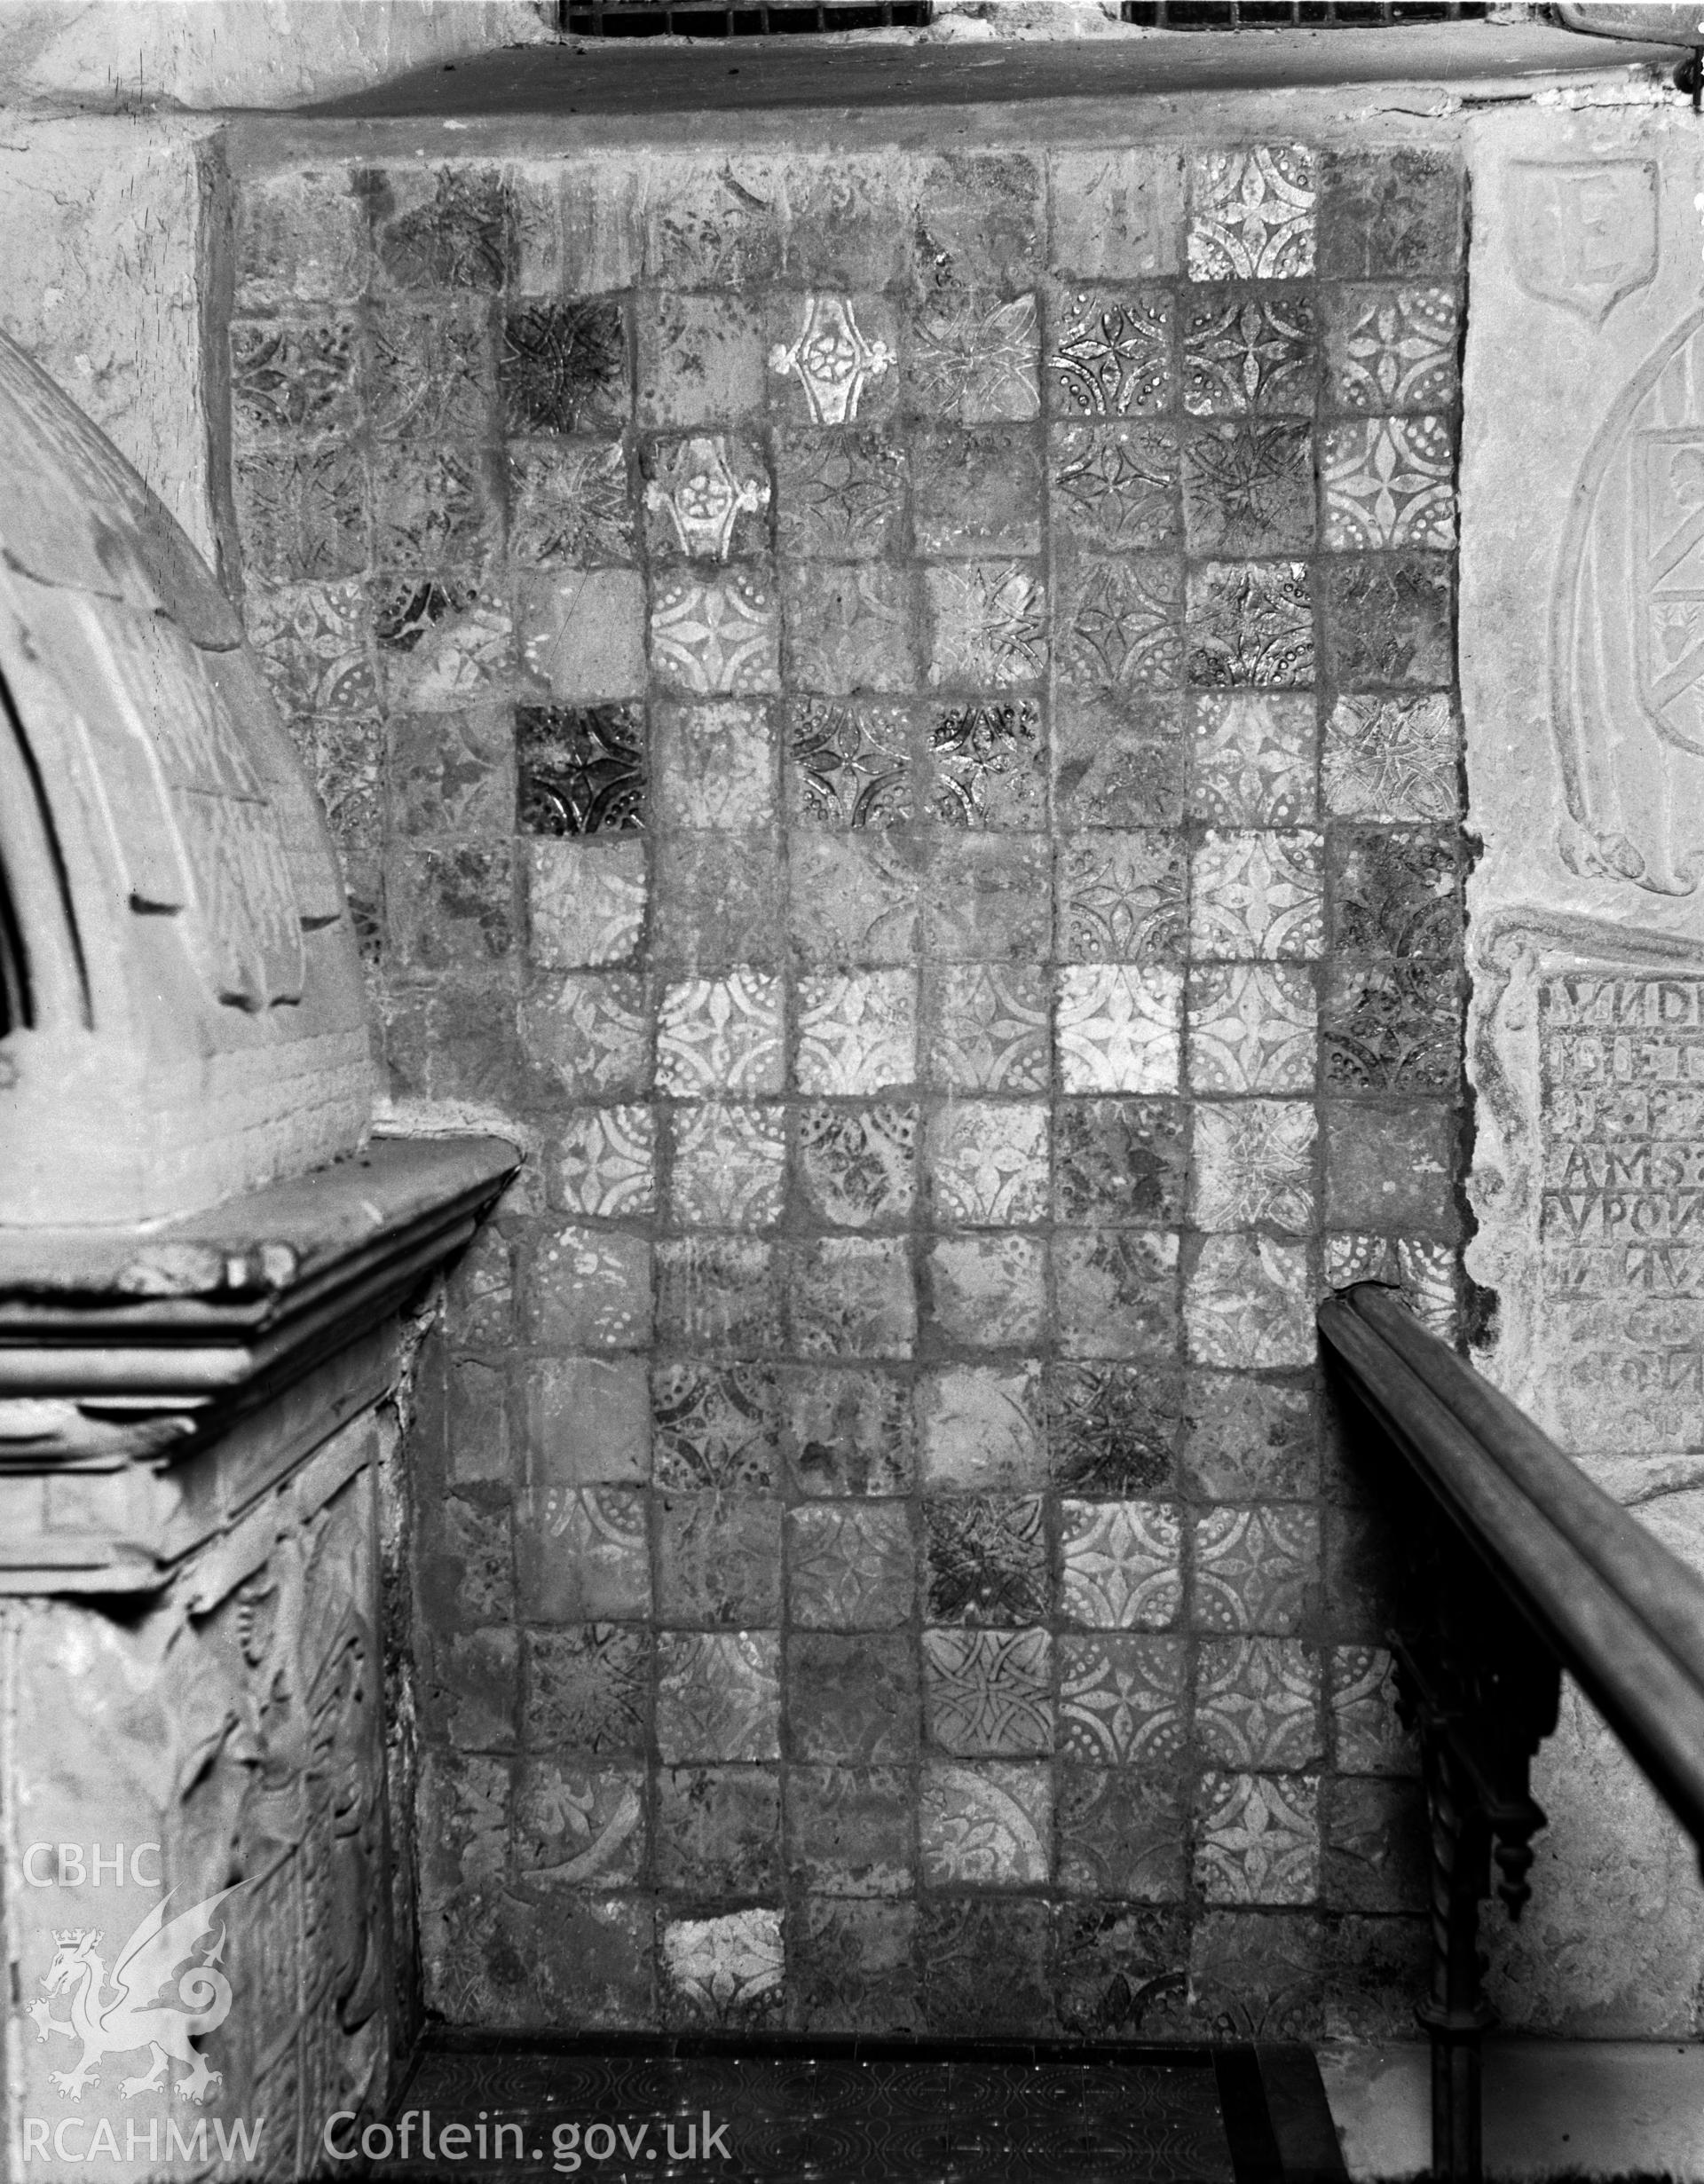 Interior view of St Marys Church Conwy showing detail of tiled floor, taken in 10.09.1951.